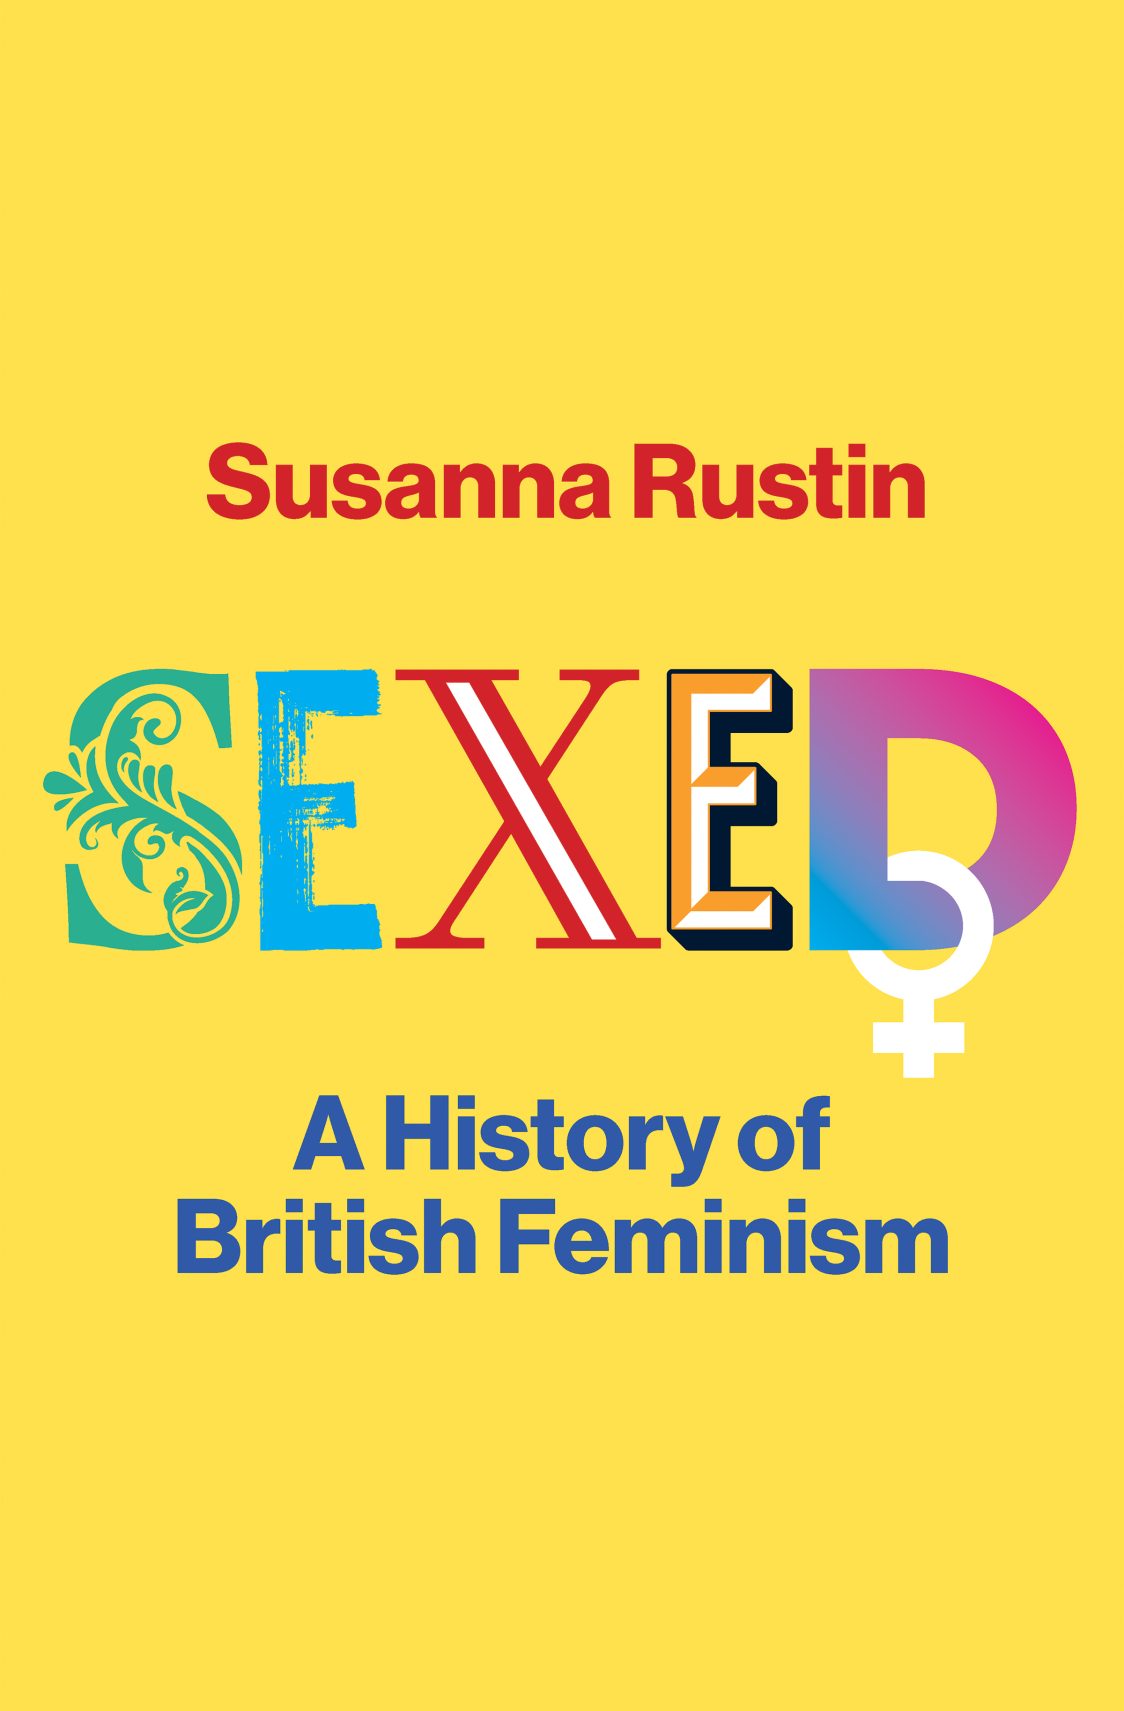 Sexed A History Of British Feminism Hardman And Swainson